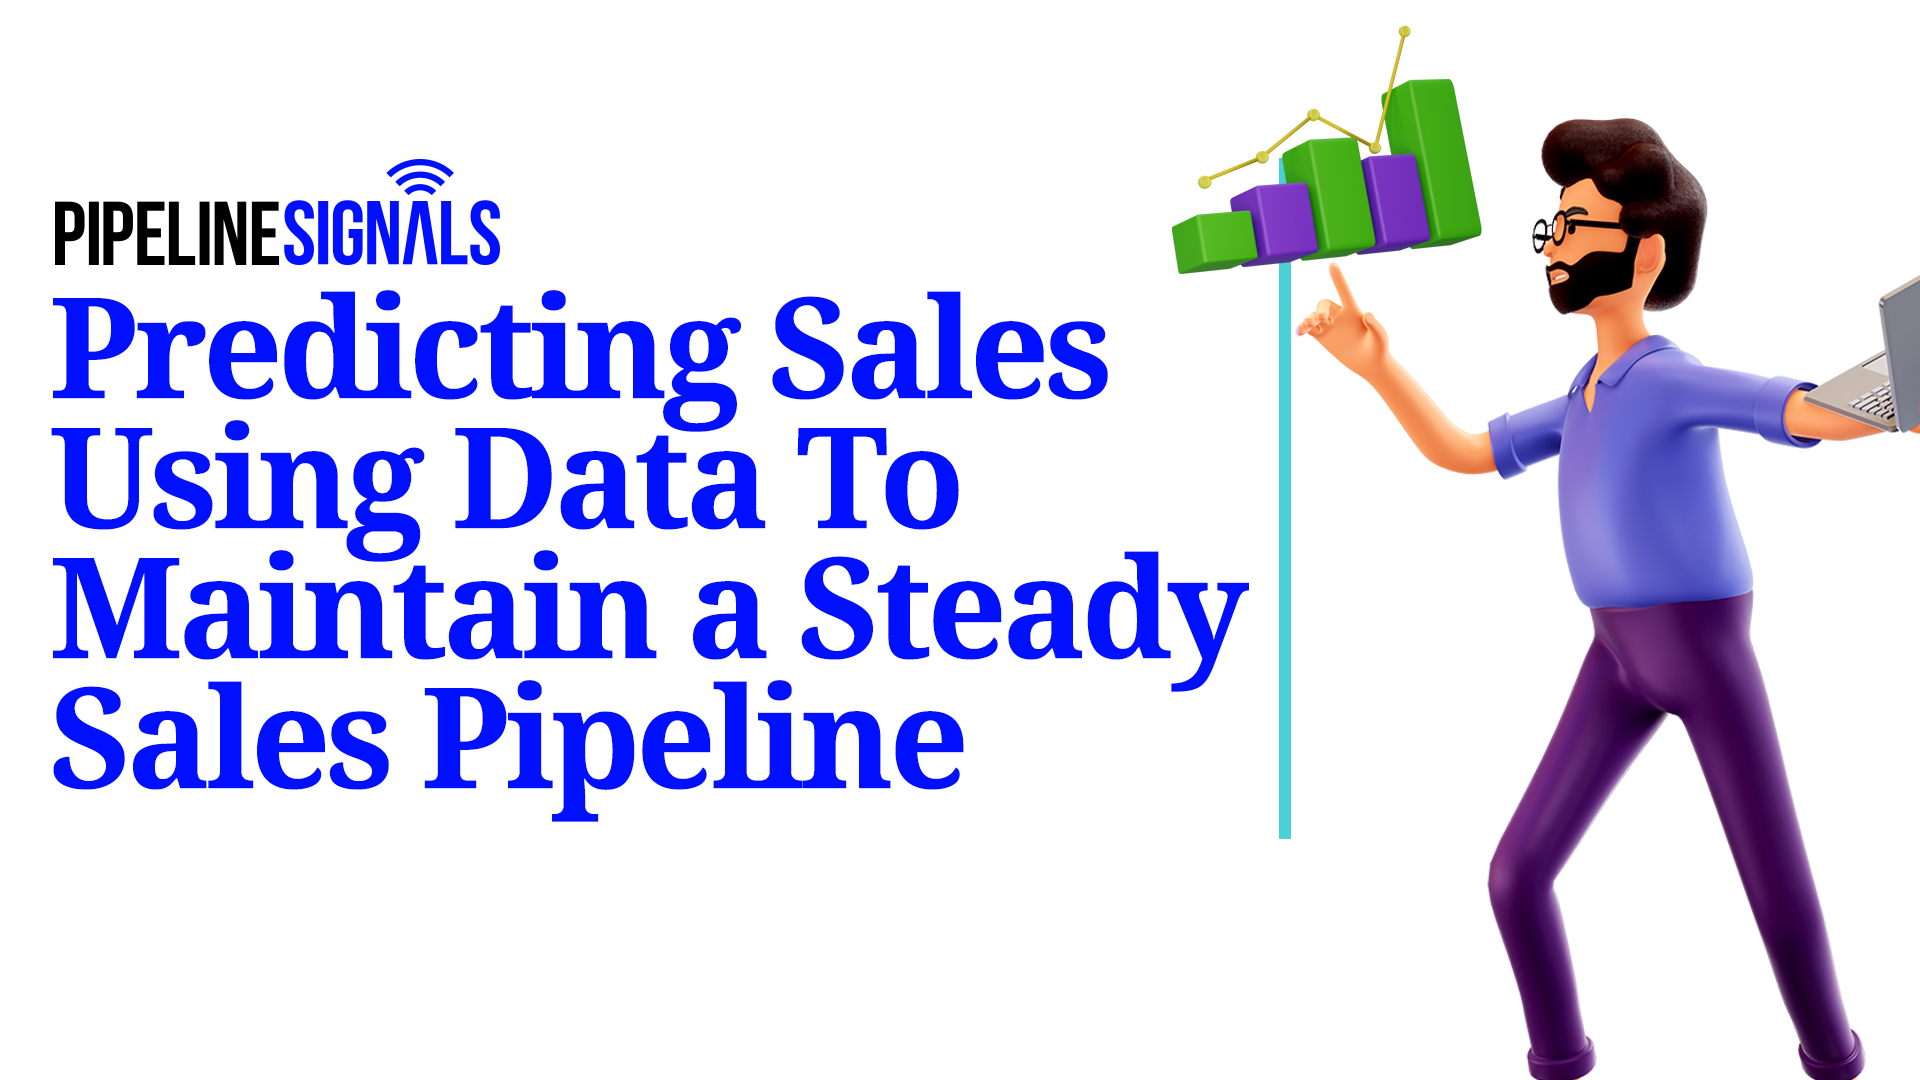 Predicting Sales Using Signal Intelligence To Maintain a Steady Sales Pipeline